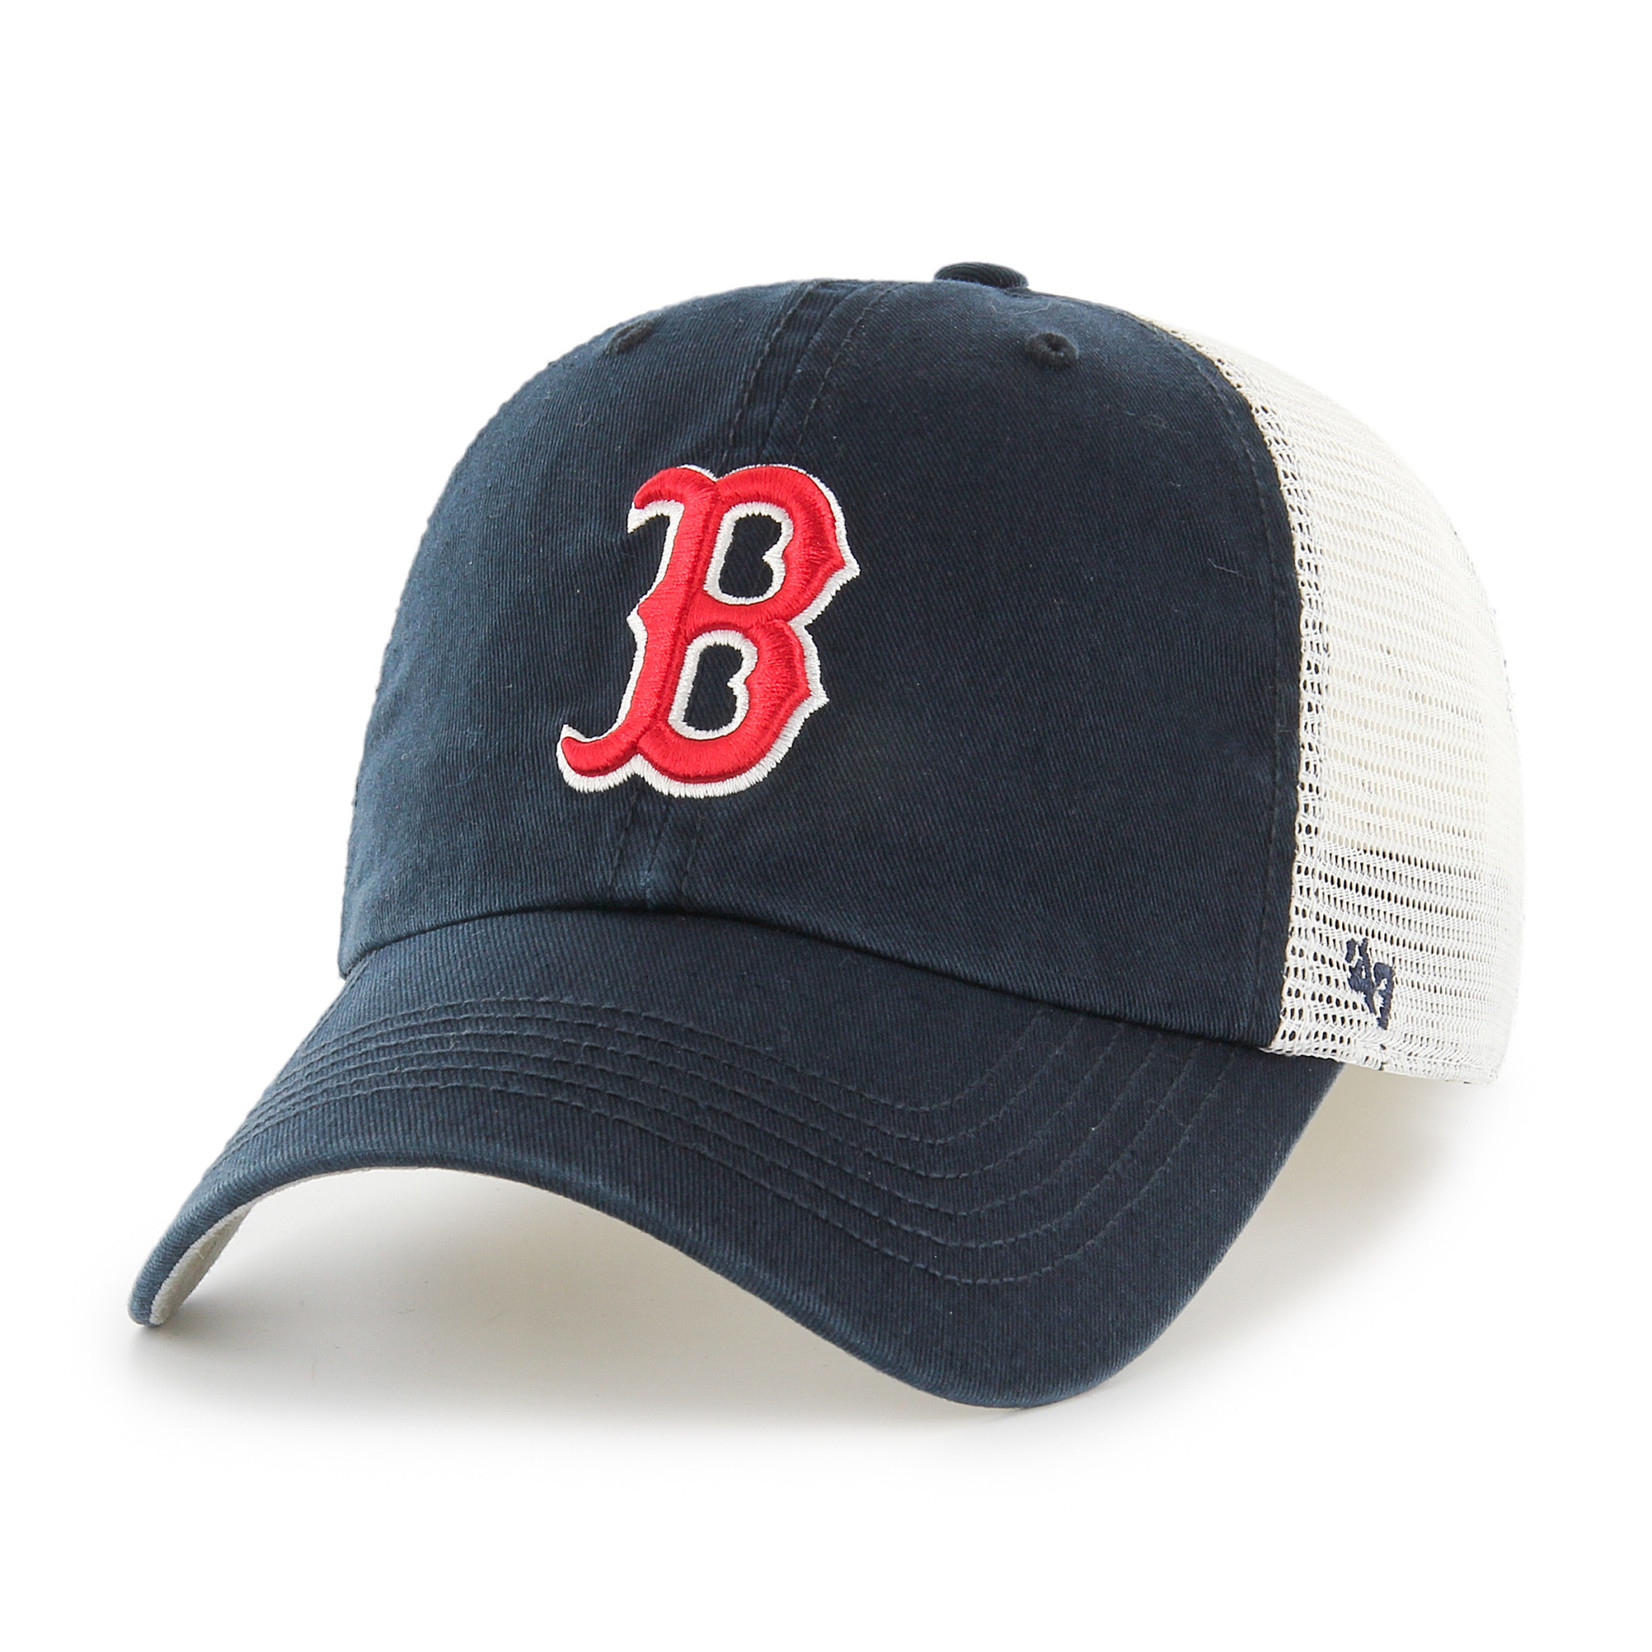 '47 Brand Red Sox Hat Stretch Fit S-M